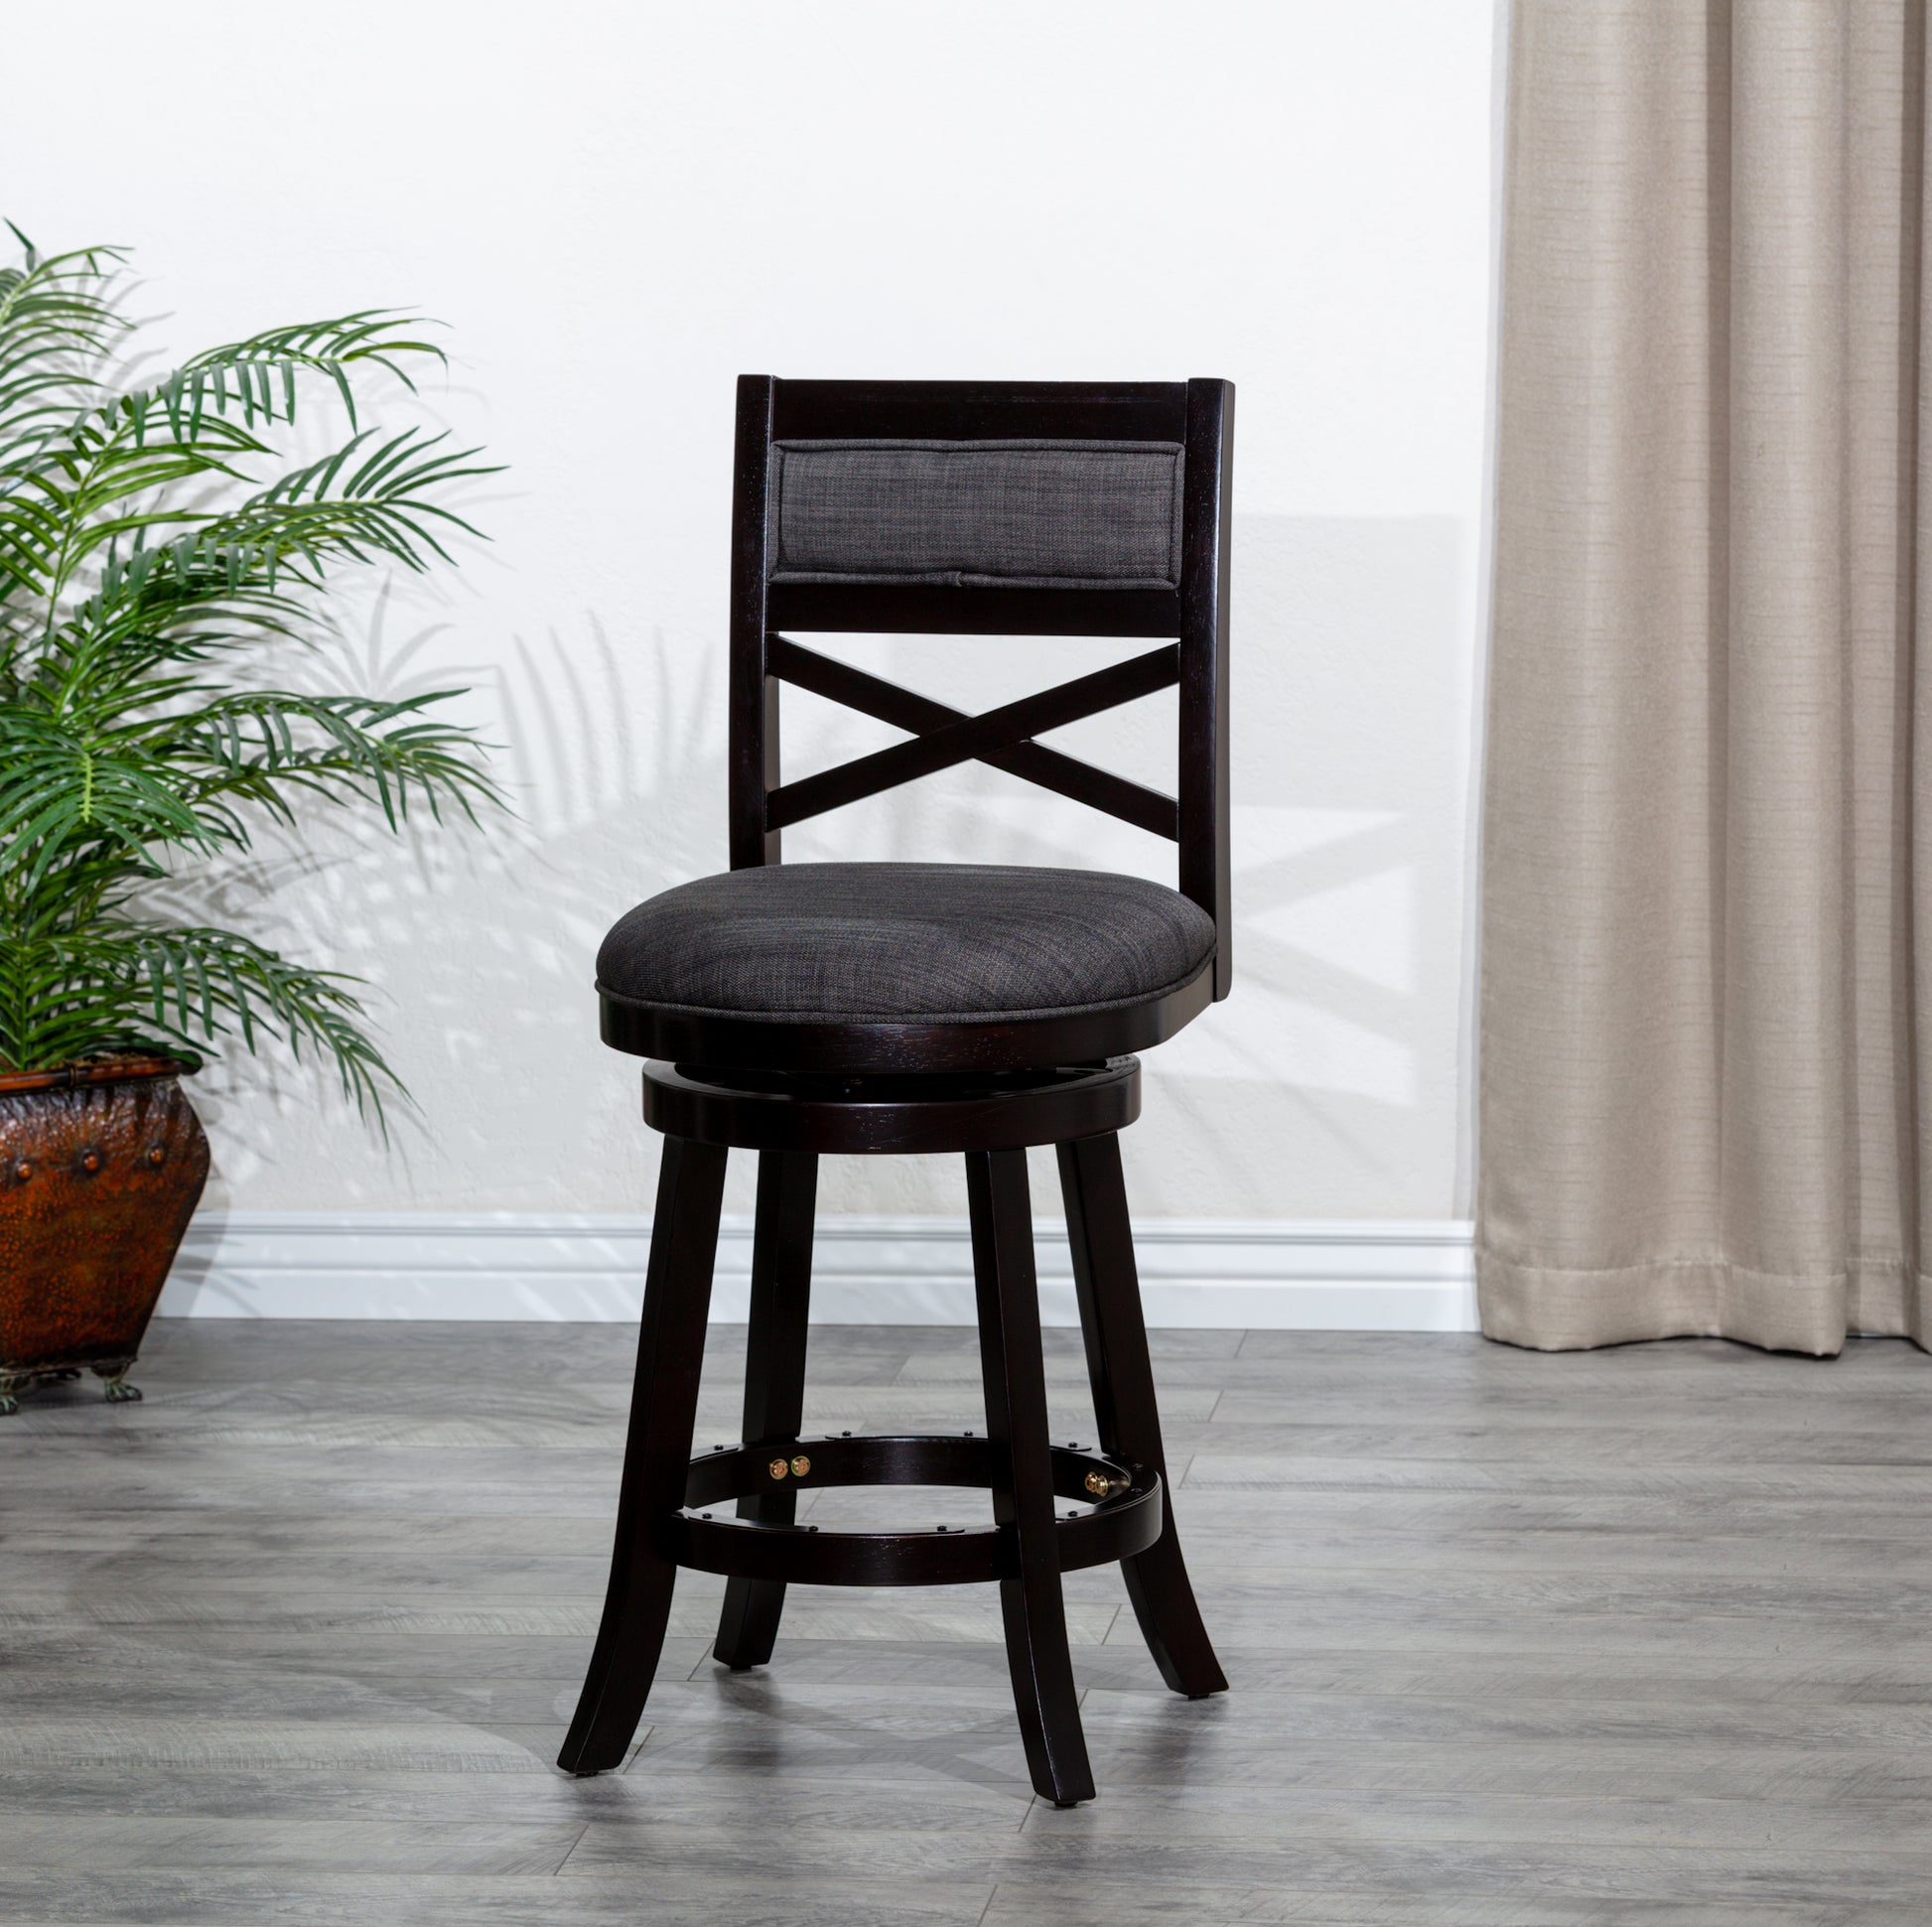 DTY Home 30" Swivel Bar Stool in Espresso with Charcoal Fabric Seat